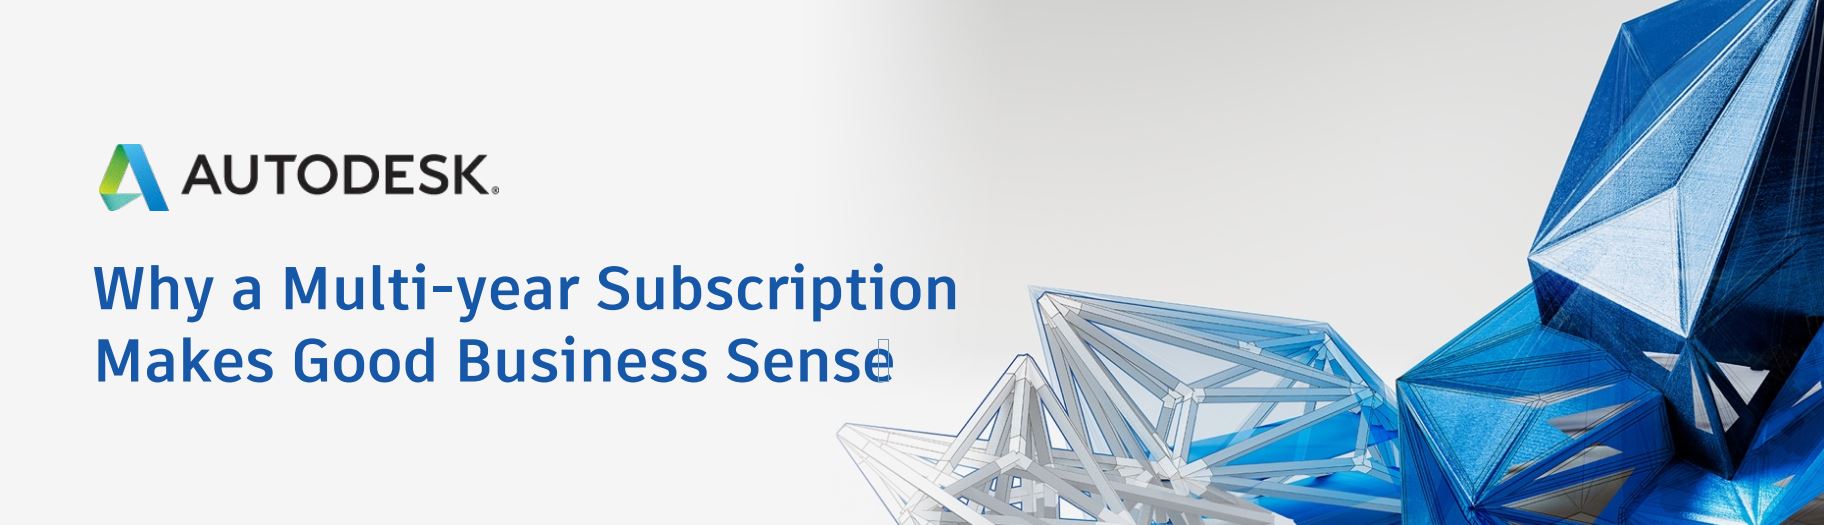 Why An Autodesk Multi-Year Subscription Makes Good Business Sense